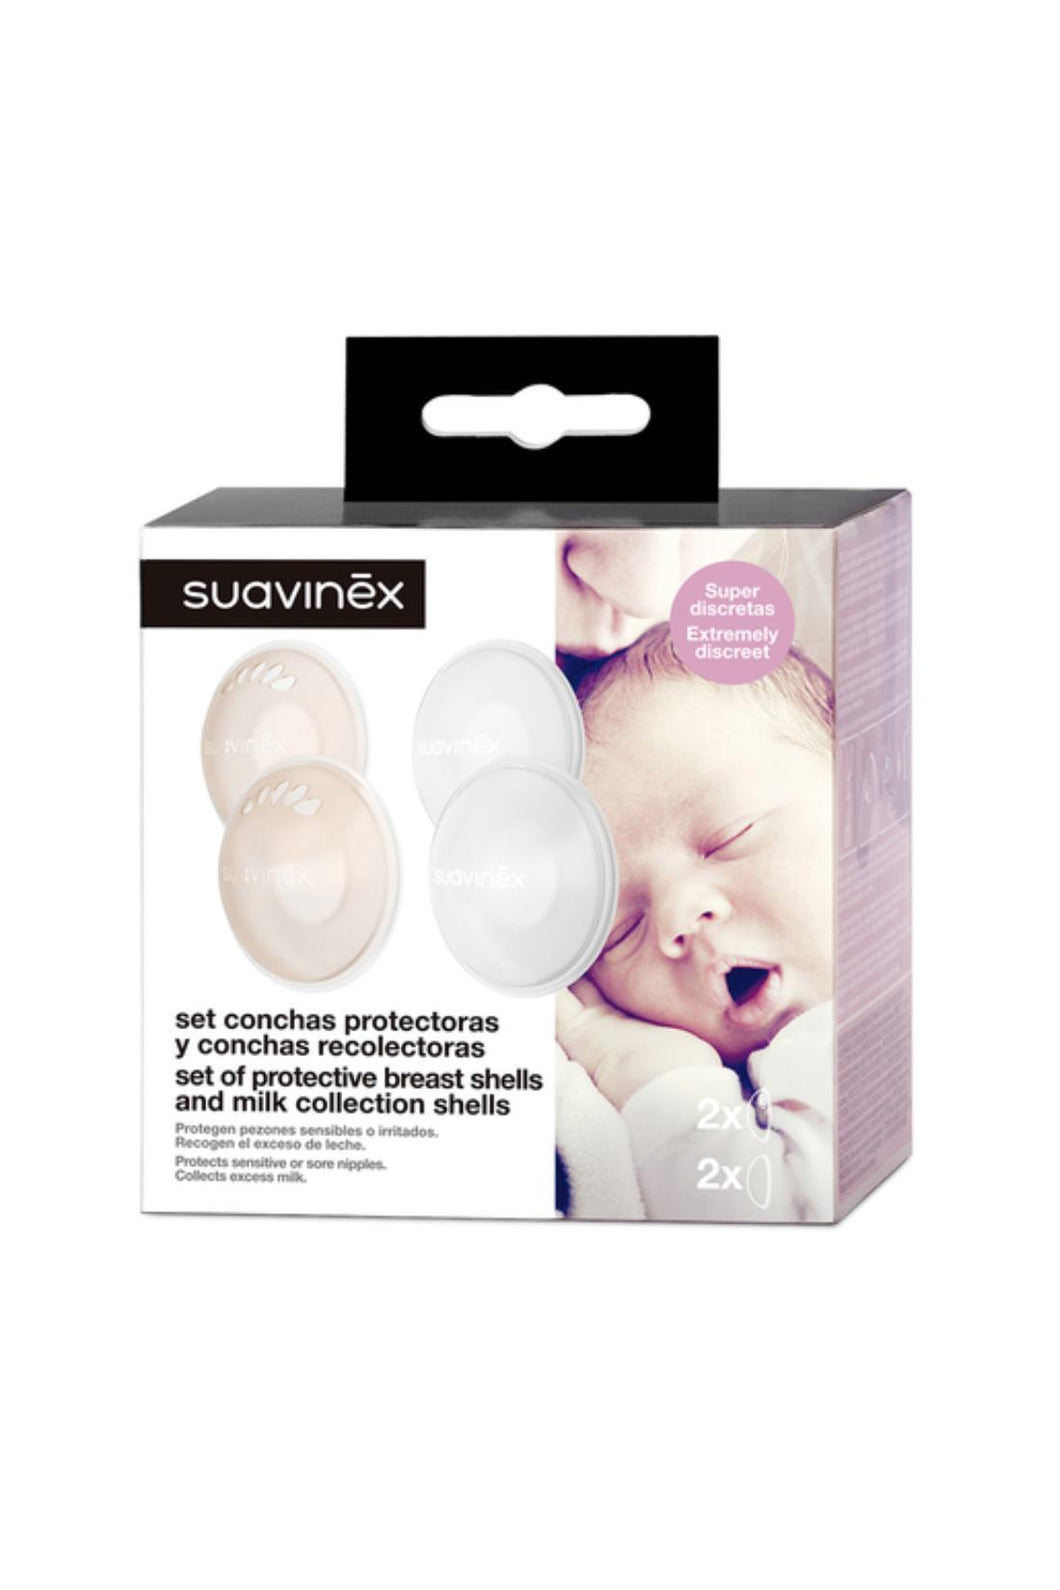 Suavinex - Set of Protective Breast Shells and Milk Collection Shells - 2 units of each